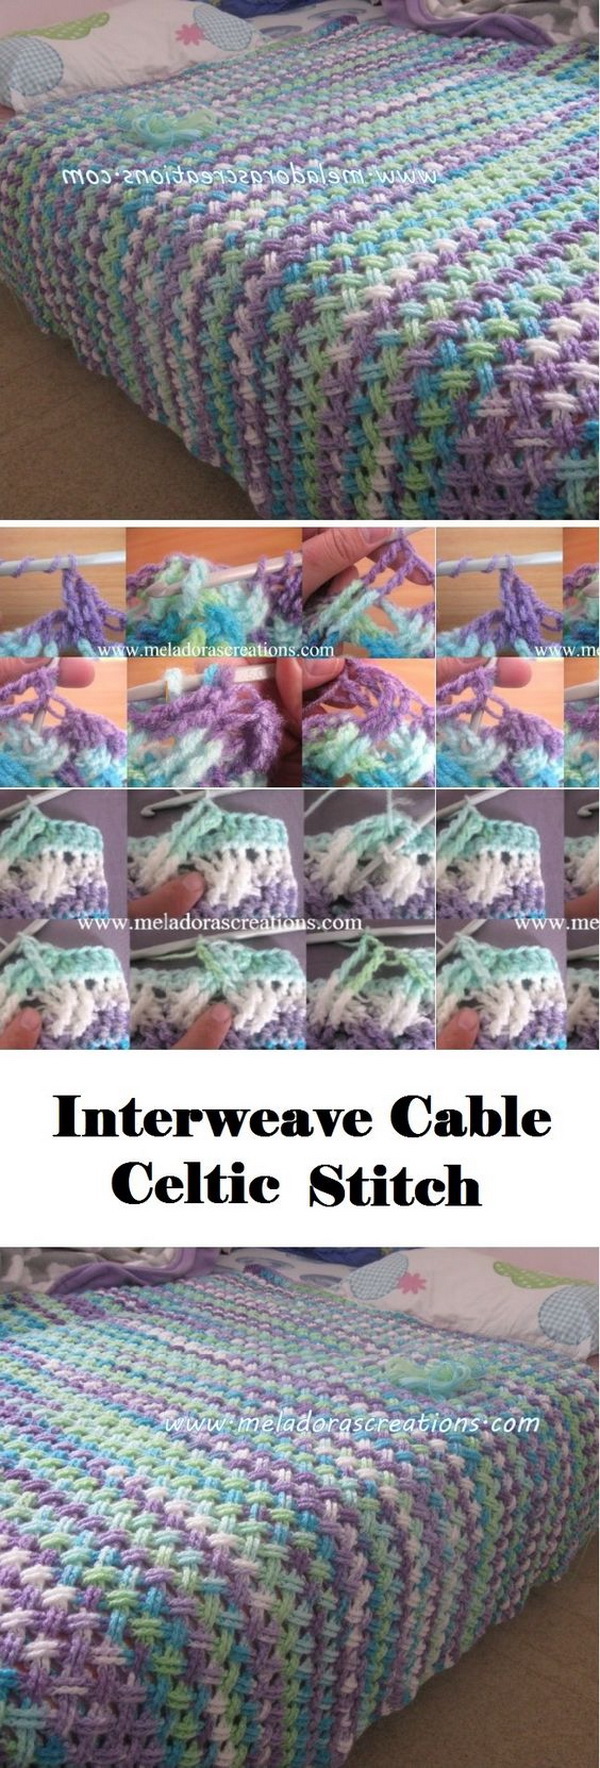 Quick And Easy Crochet Blanket Patterns For Beginners: Interweave Cable Celtic Stitch. 